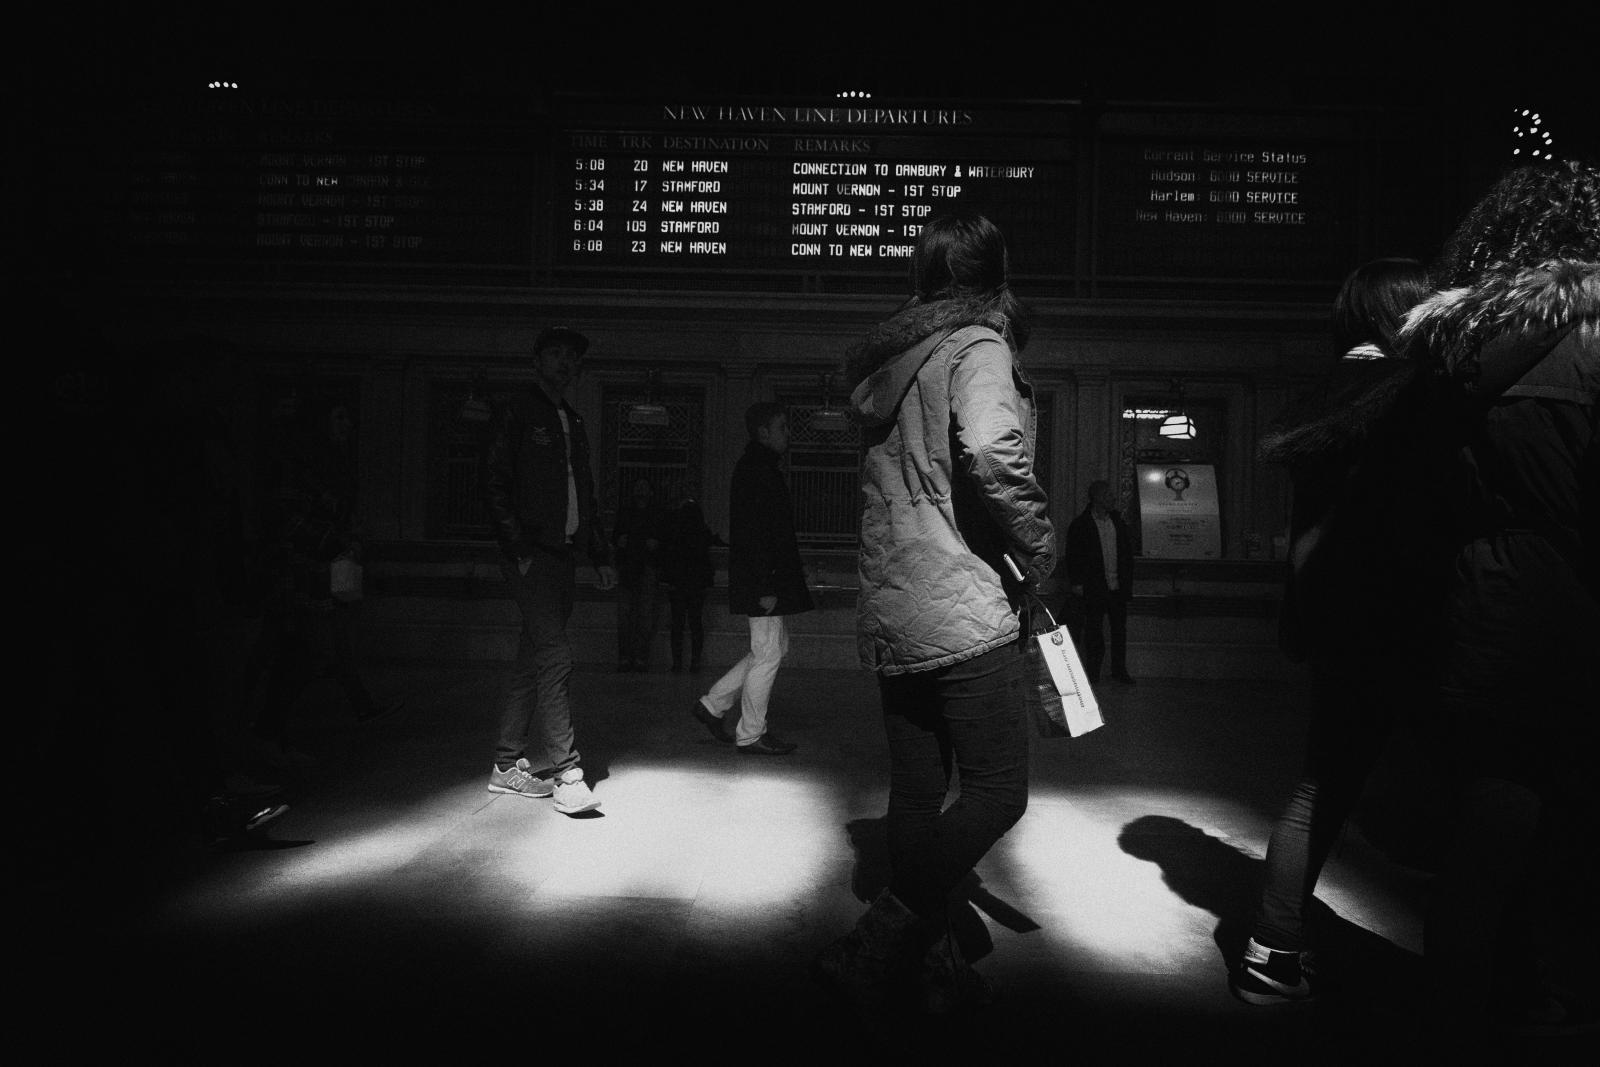 Commuter | Buy this image